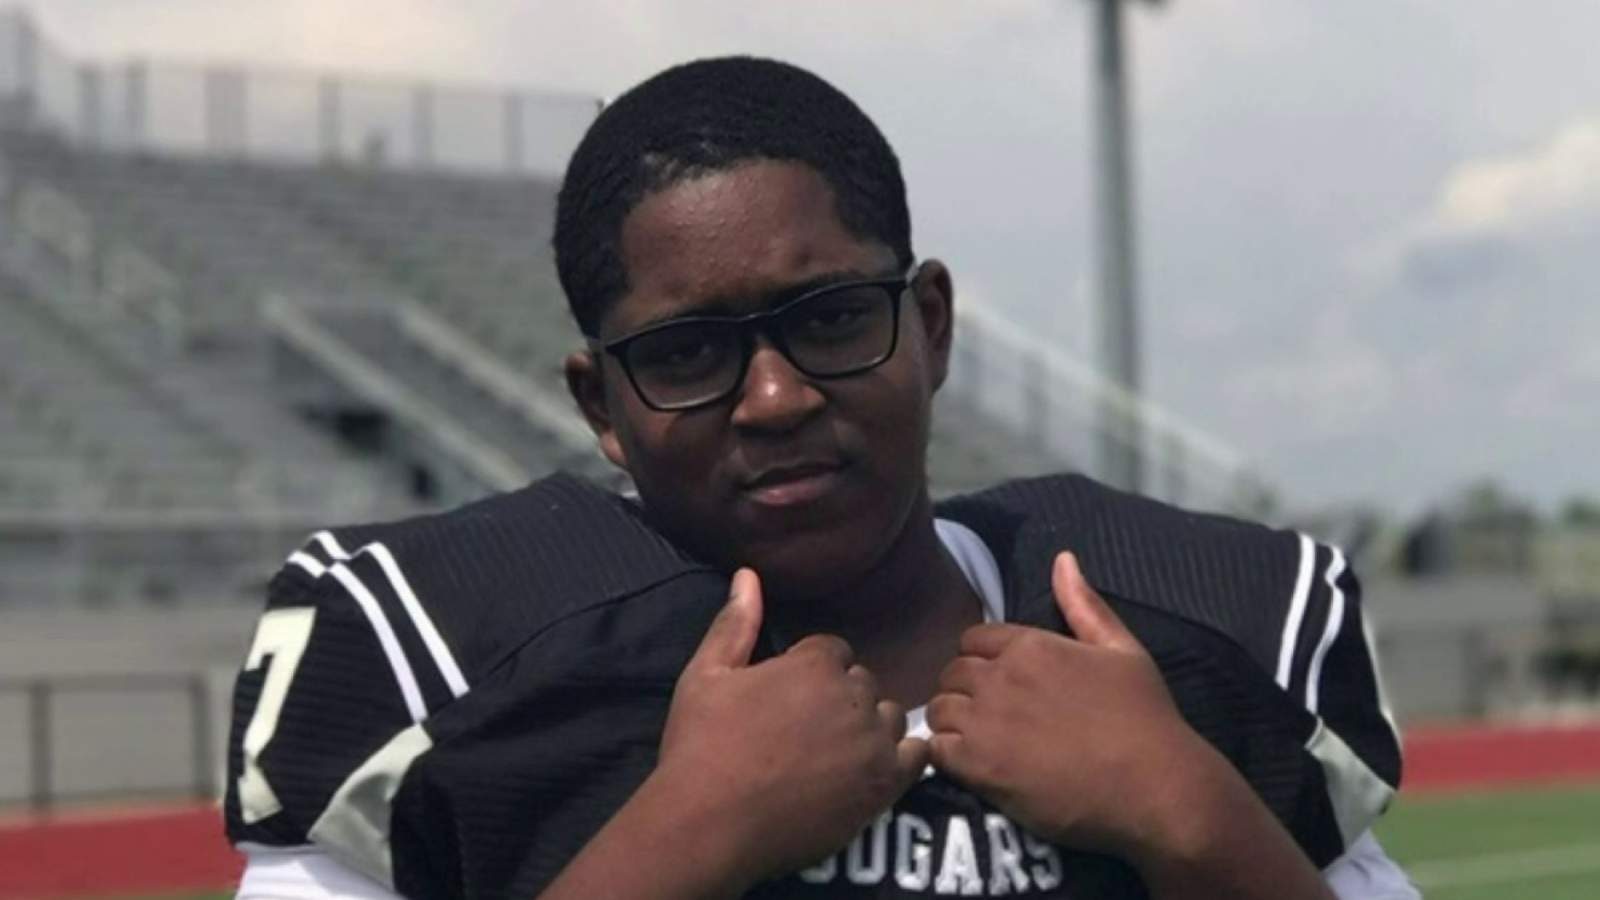 South Lyon east H.S. football player dies after knee surgery